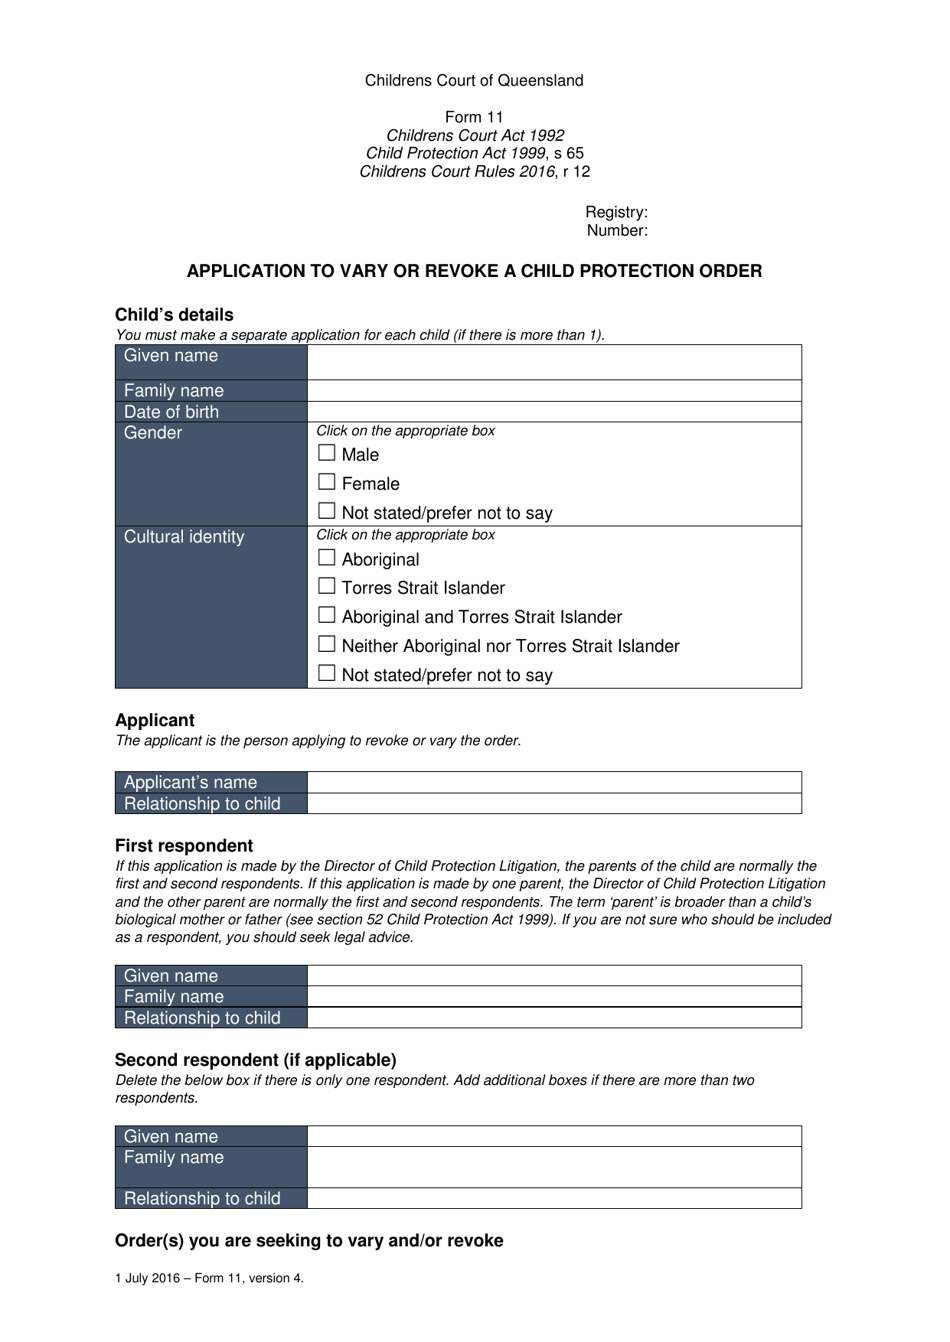 Form 11 Application to Vary or Revoke a Child Protection Order - Queensland, Australia, Page 1